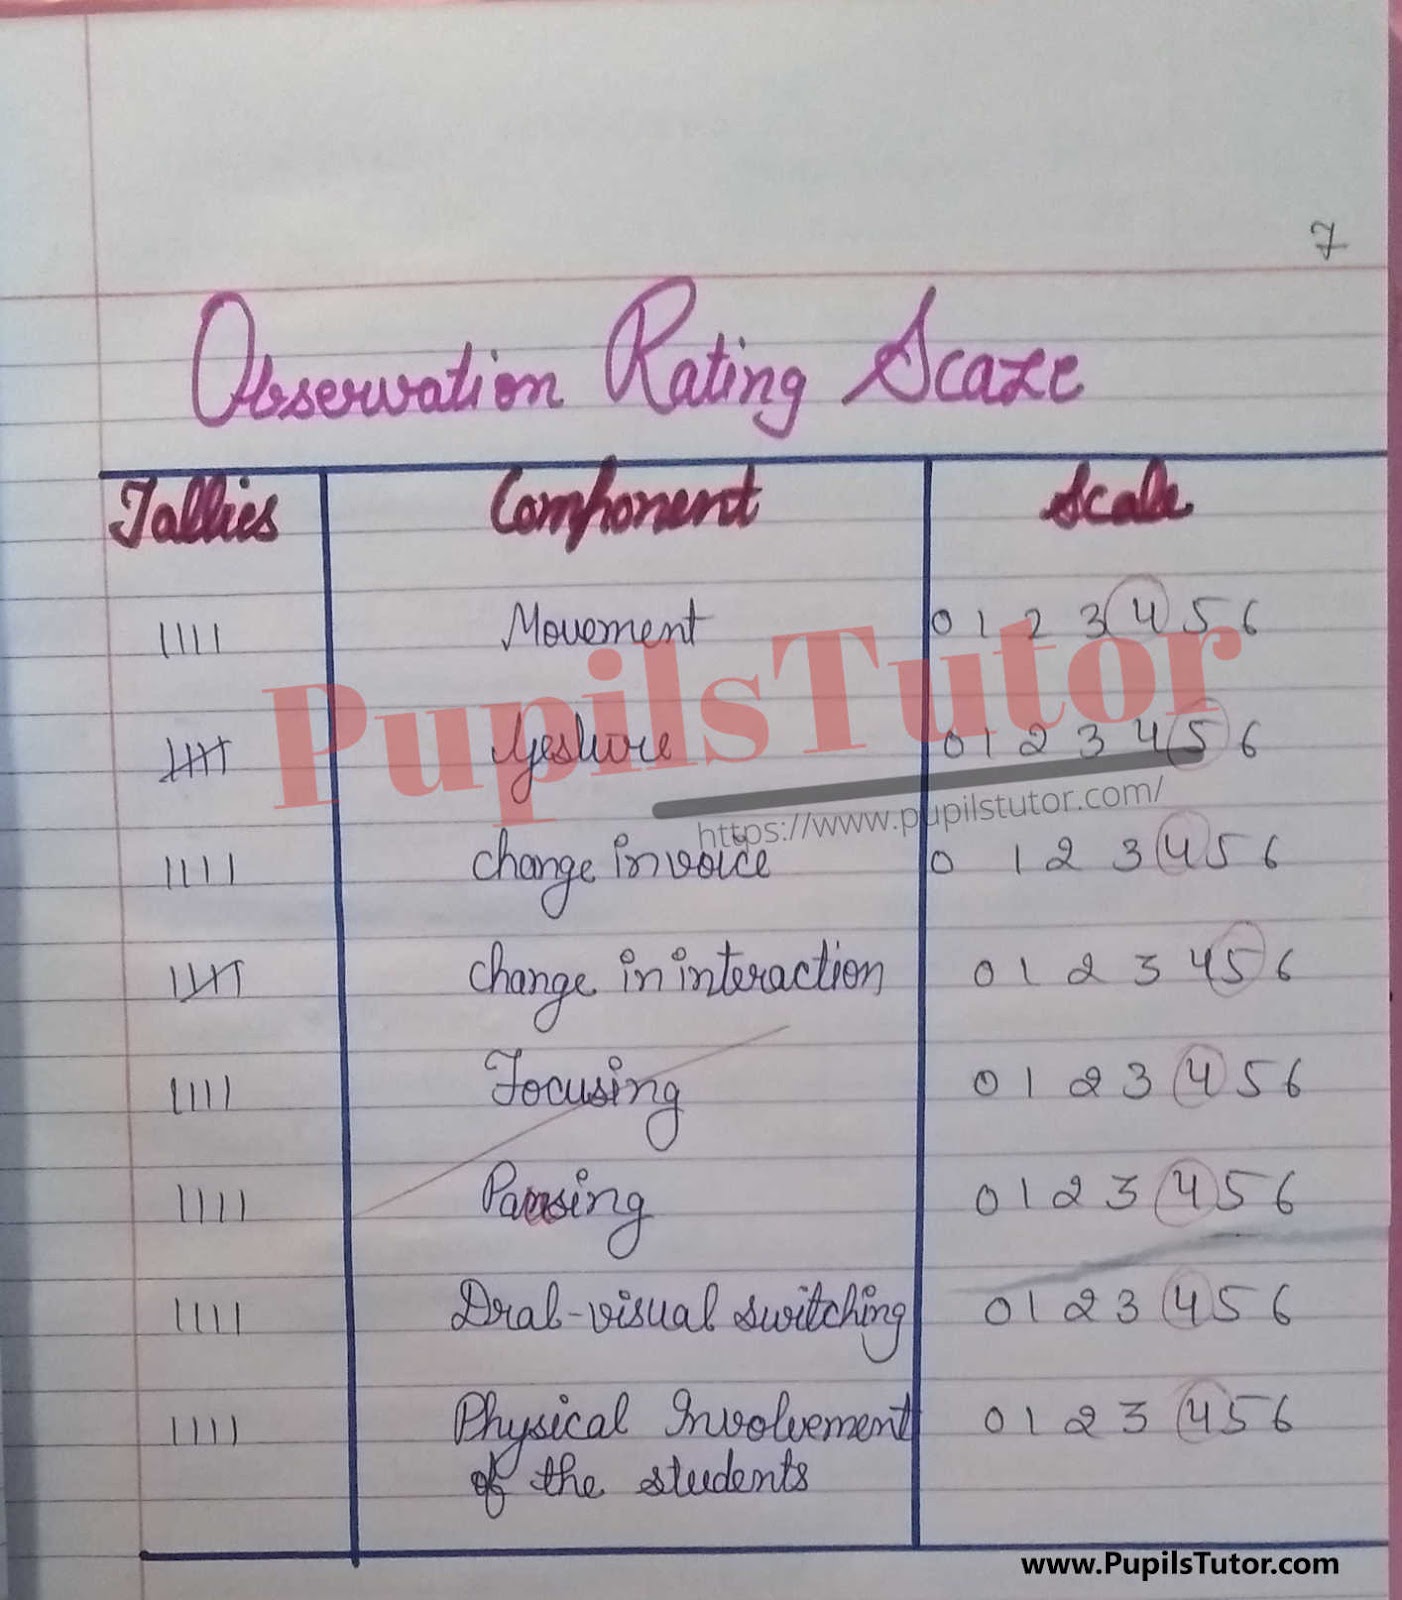 Class/Grade 7 To 10 Science Micro Teaching Skill Of Stimulus Variation Lesson Plan On Chemical Bond For CBSE NCERT KVS School And University College Teachers – (Page And Image Number 3) – www.pupilstutor.com